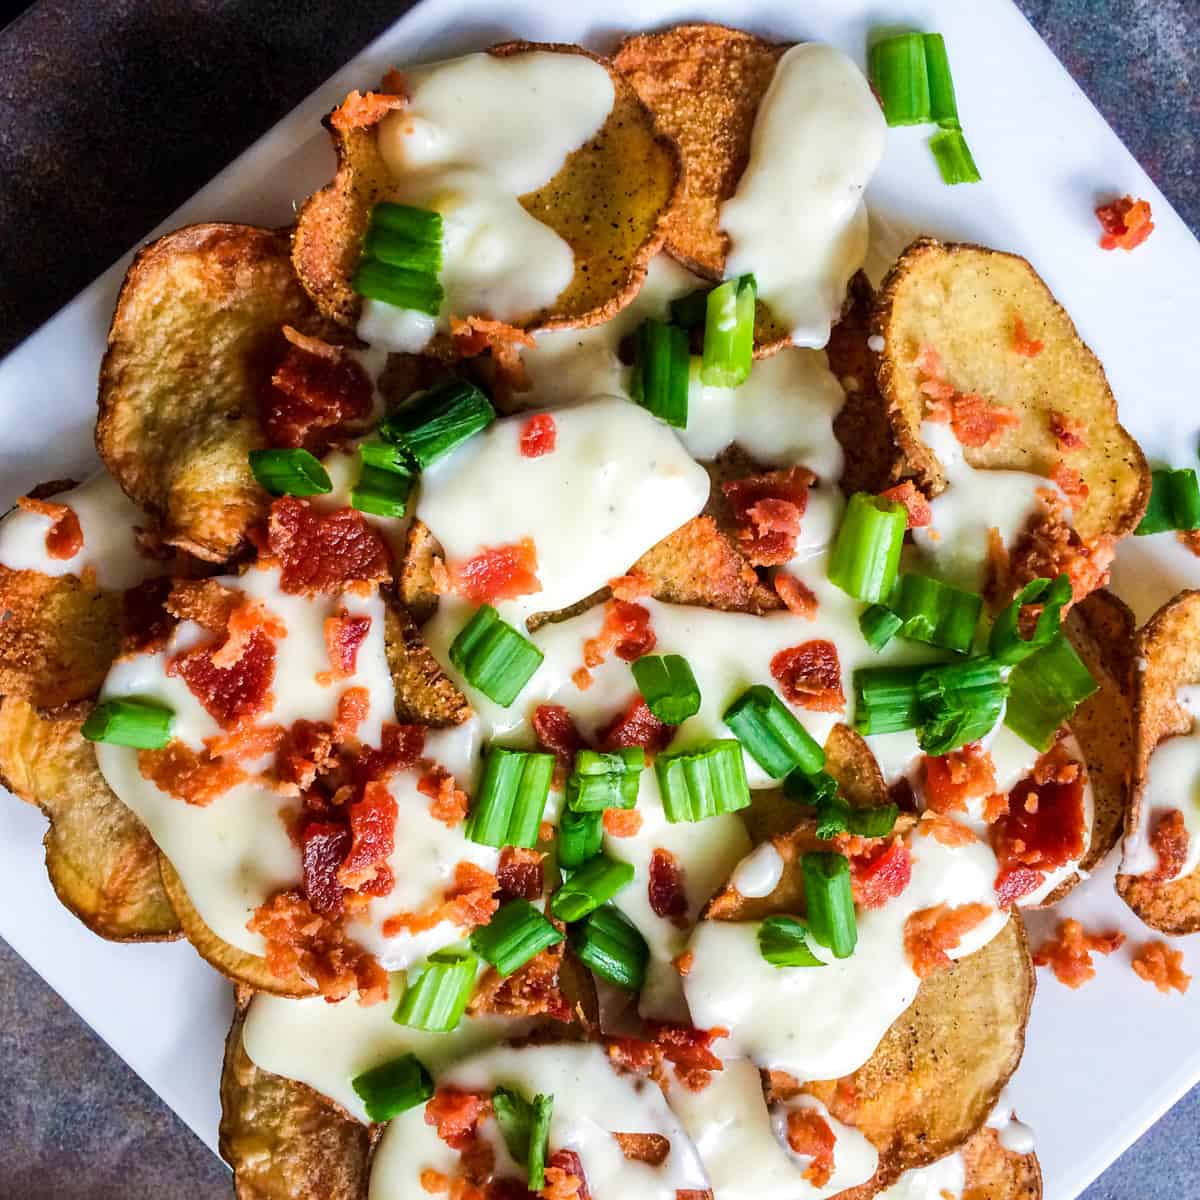 Baked Potato Chips with Gorgonzola Cheese Sauce